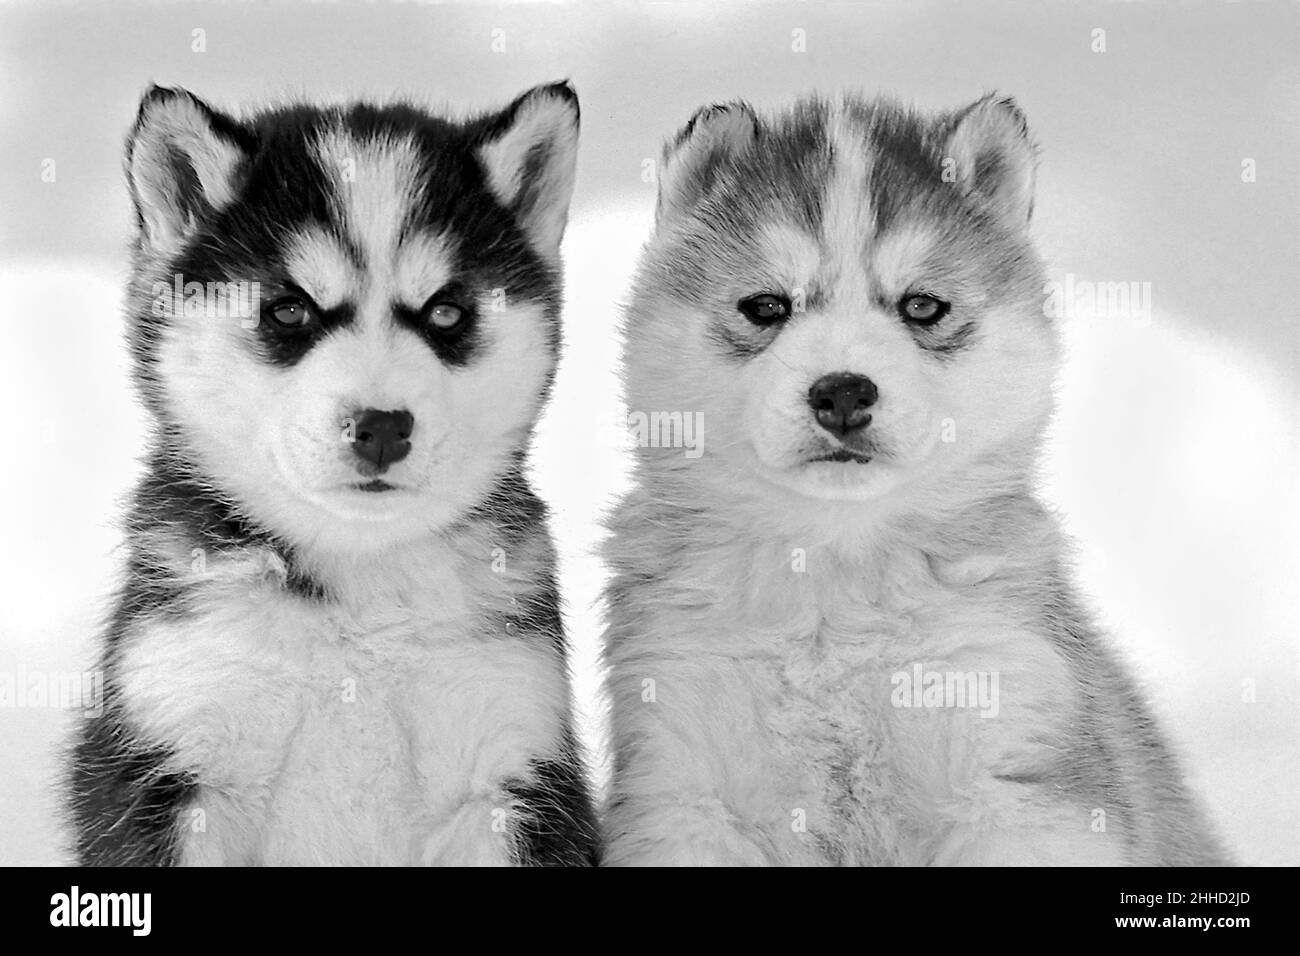 Two adorable Siberian Husky puppies sitting together in the snow, looking at camera. Stock Photo